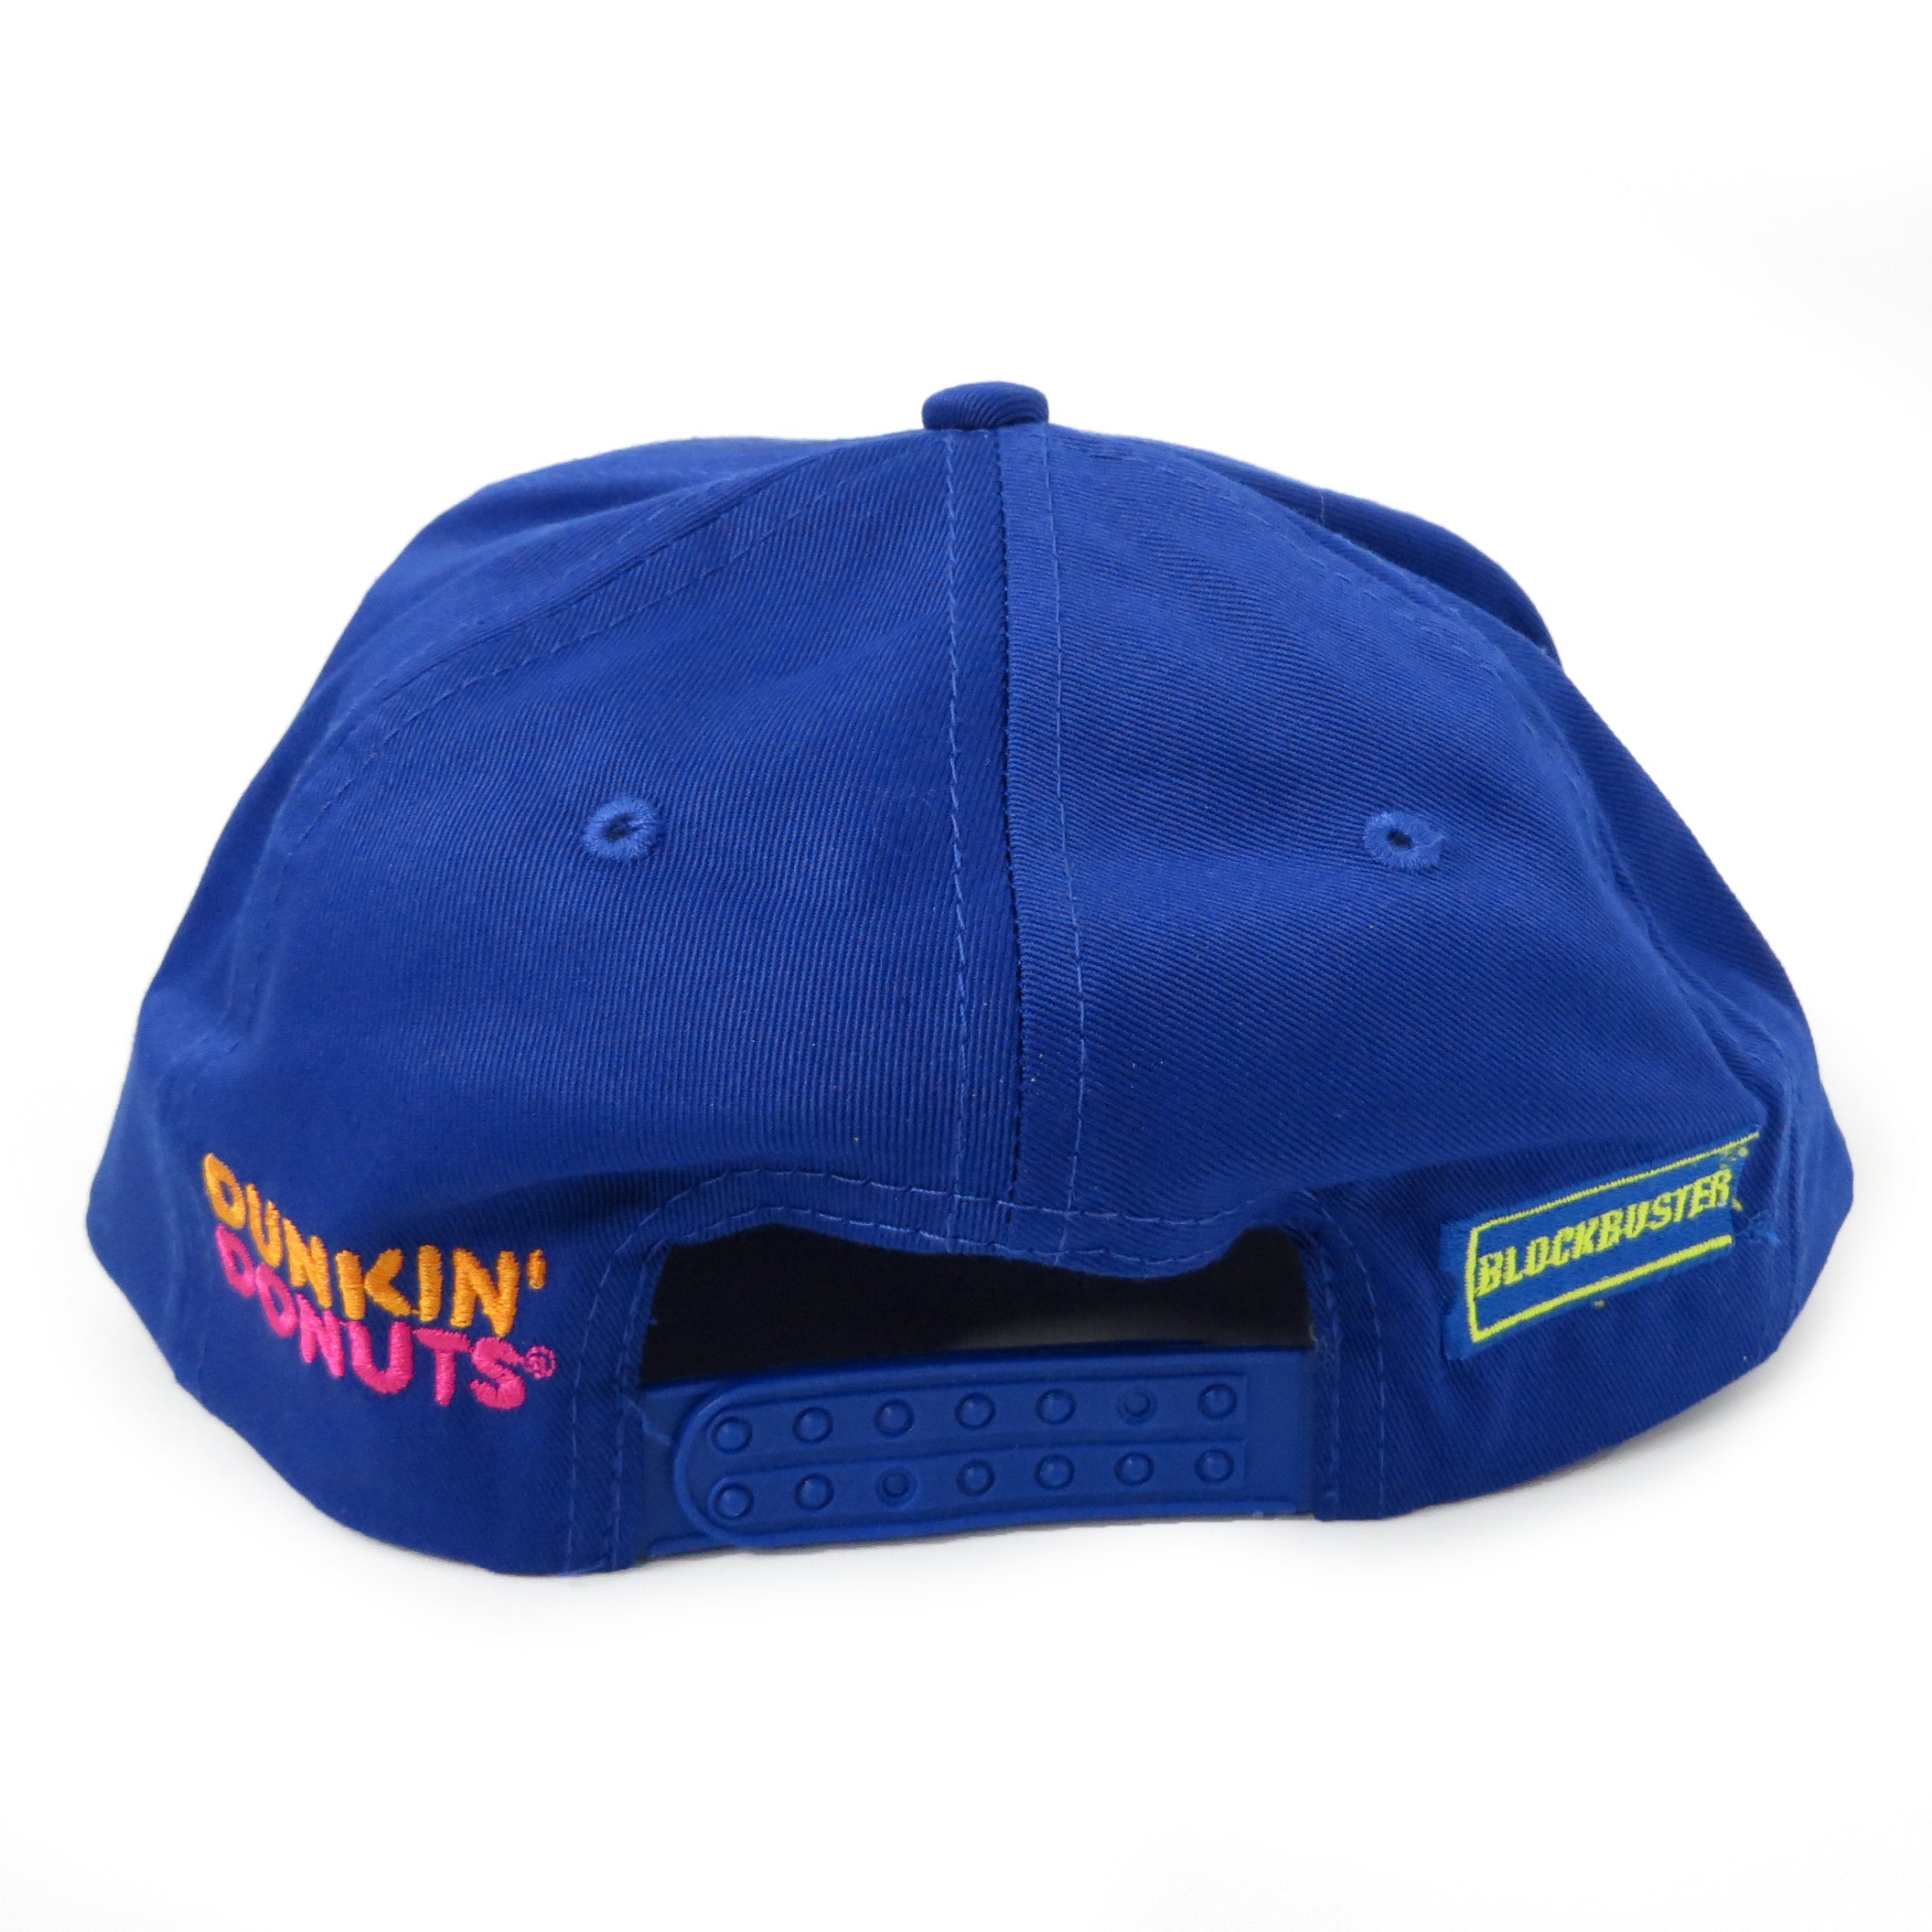 Vintage Play The Game Blockbuster Dunkin Donuts Snapback Hat